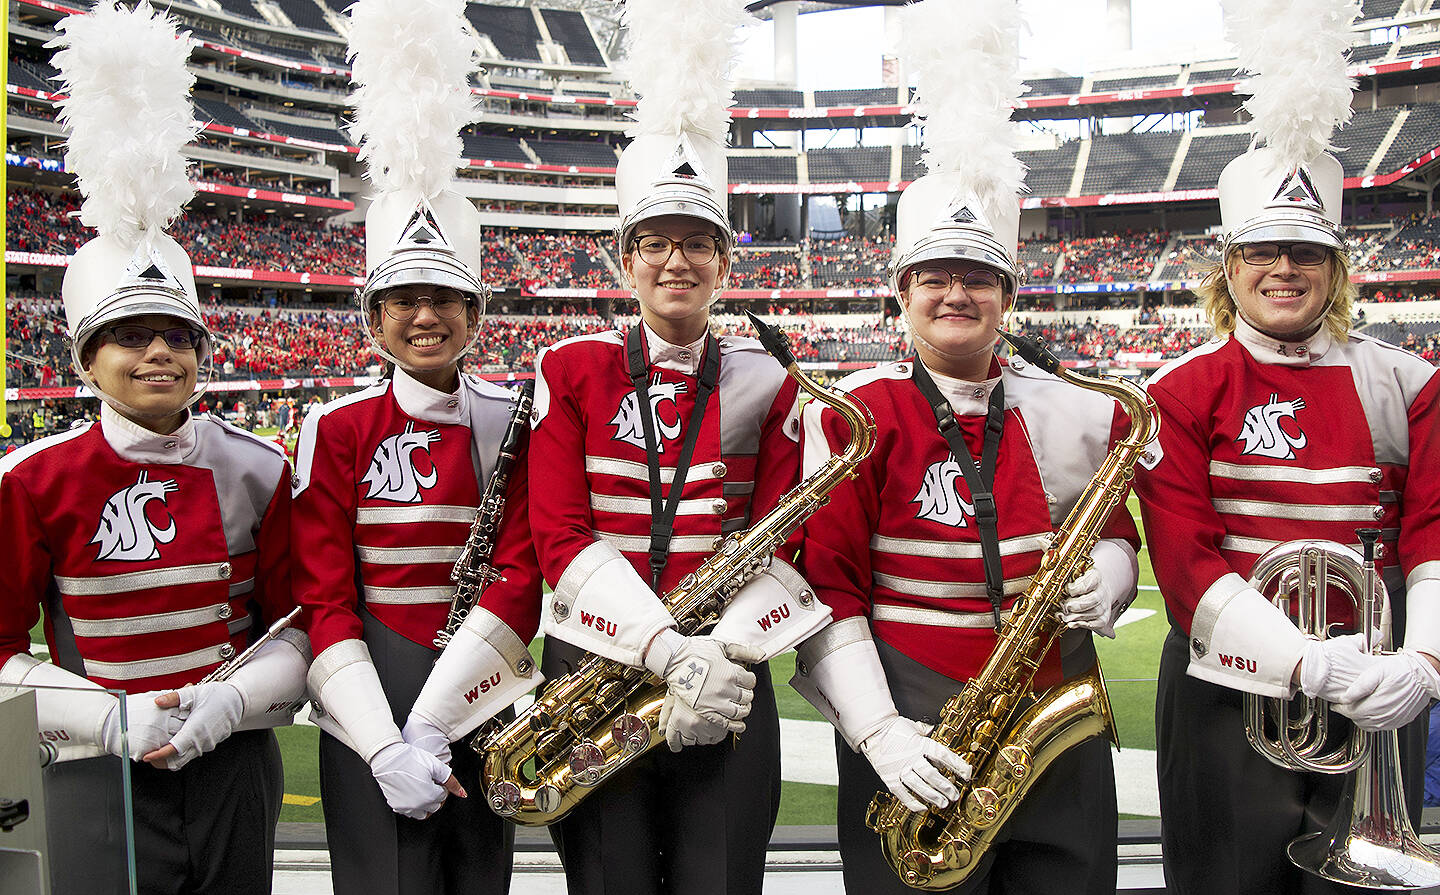 Lauren Yantis/Courtesy Photo
Cat Martin, Kate Lachica, Devi Johnson, Mickey Black and Zach Simmons all play in the WSU band and are from Kitsap County.